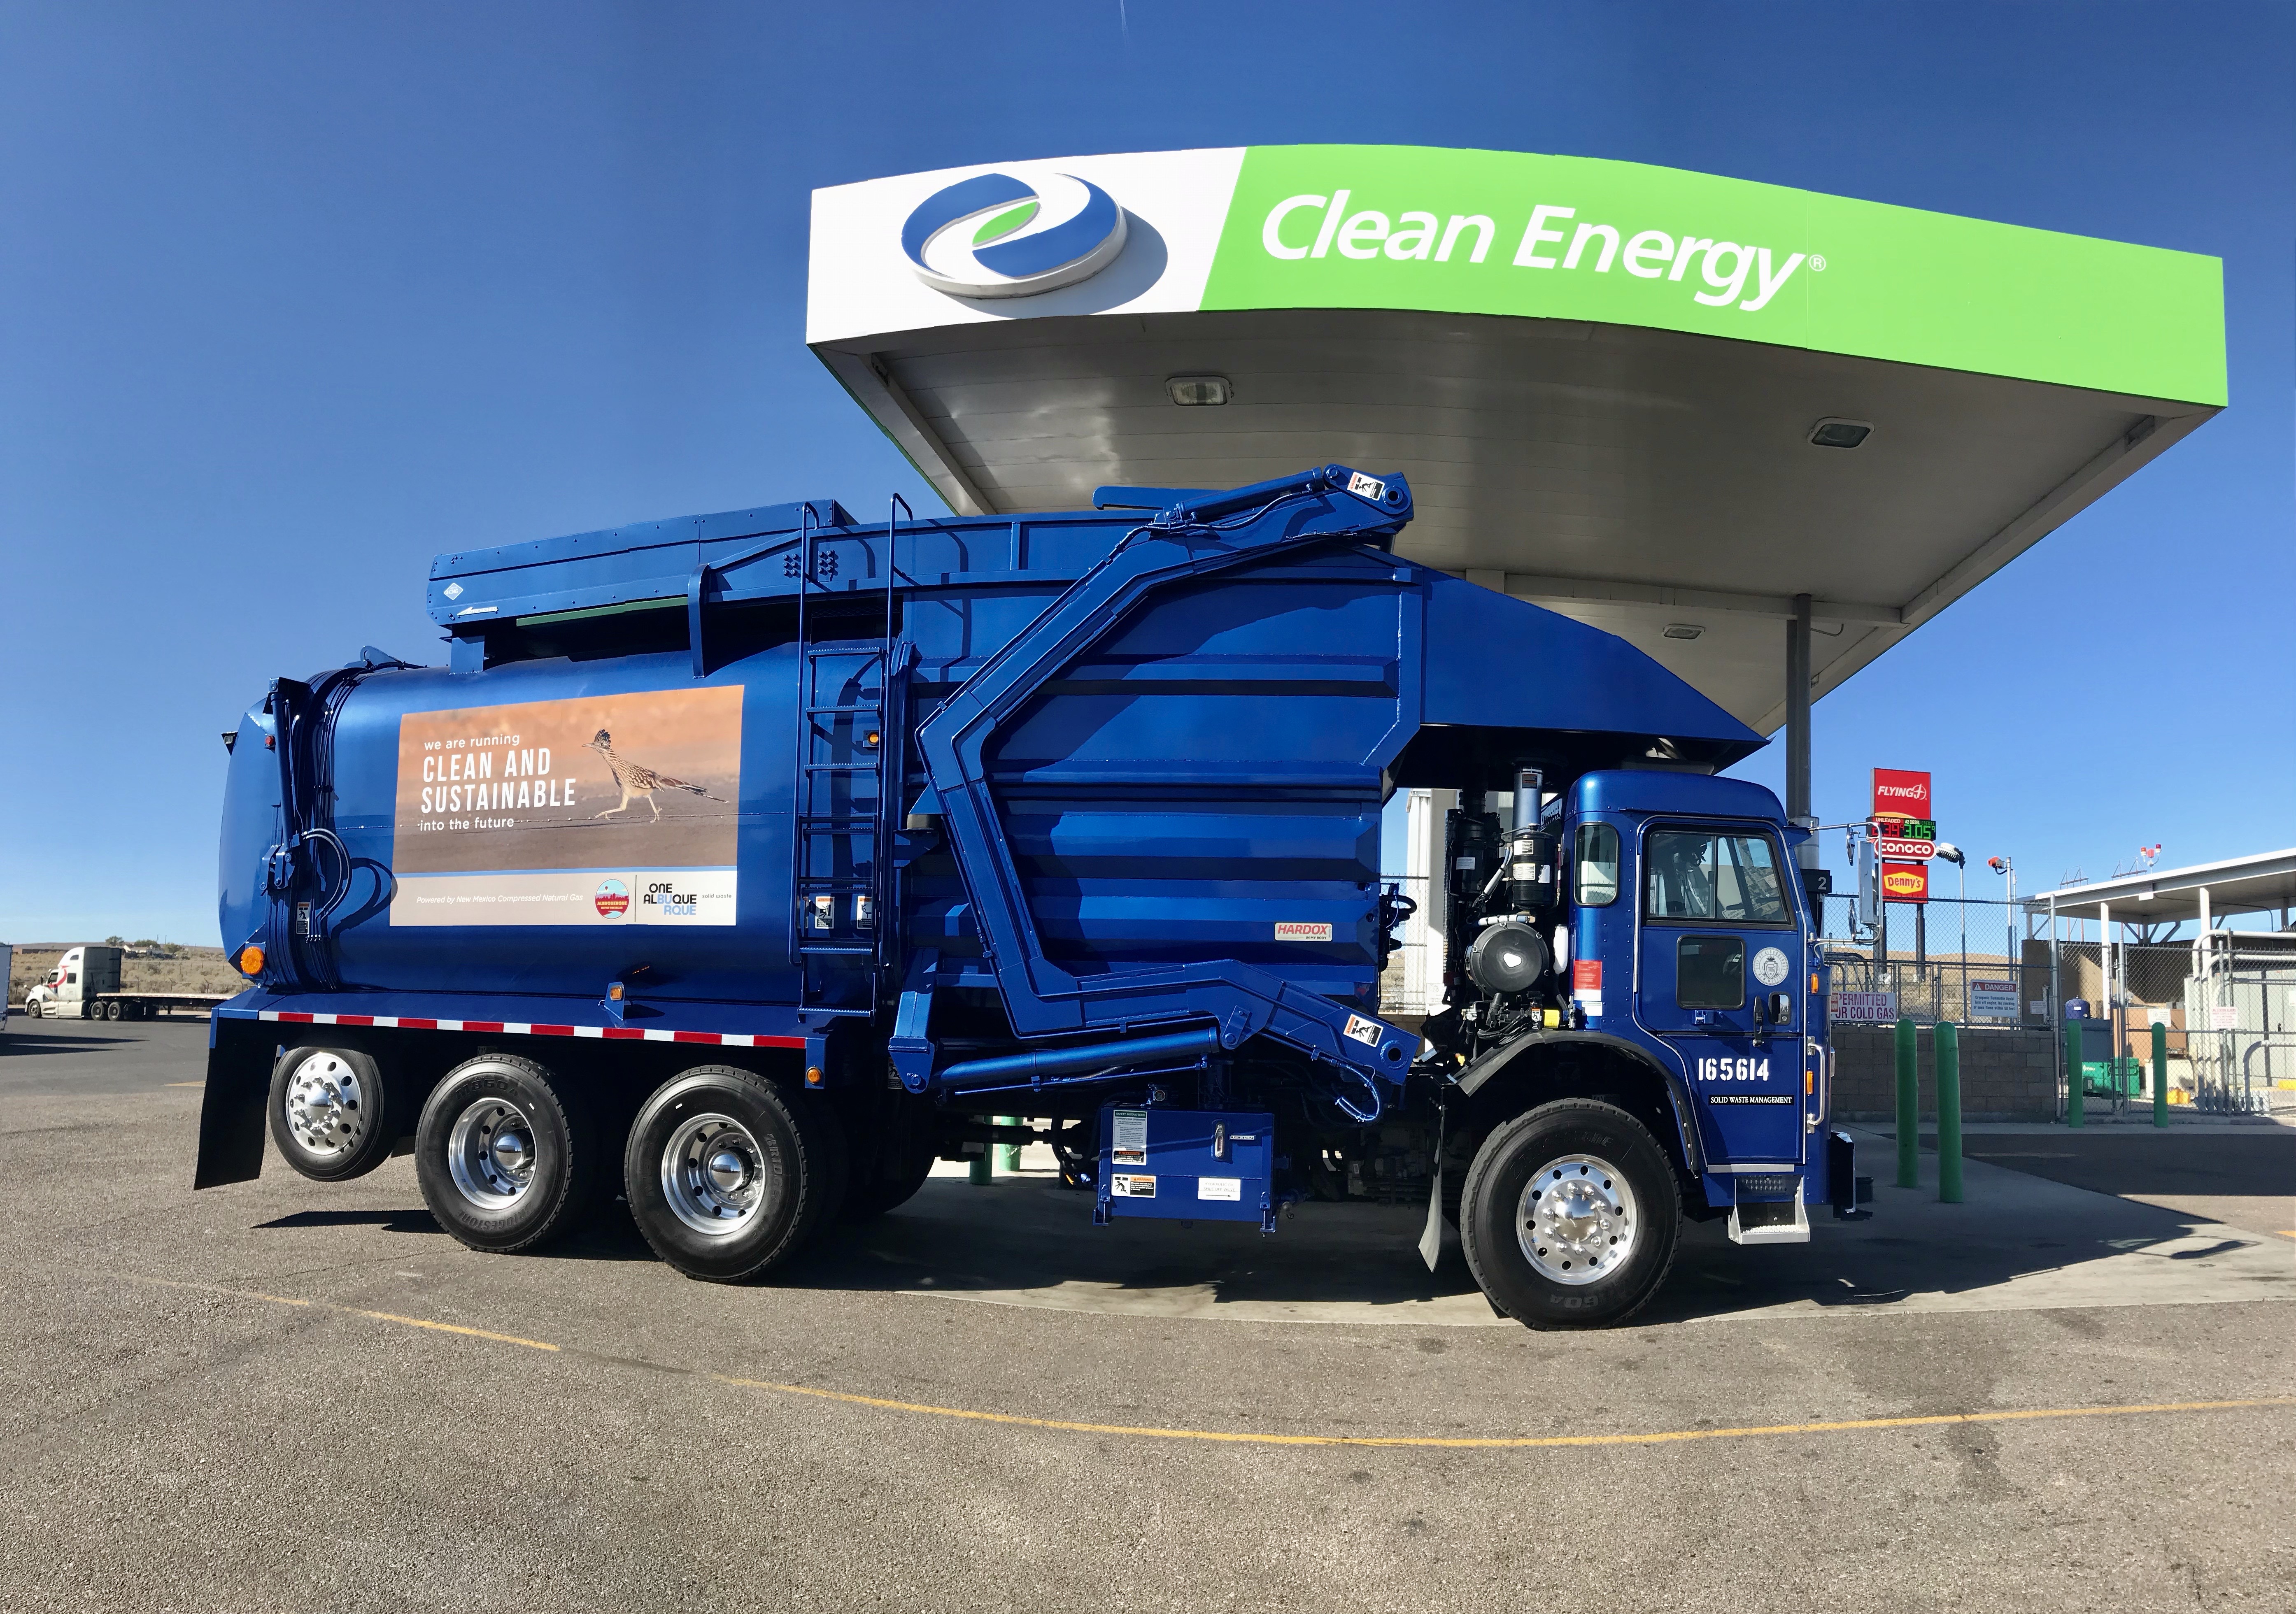 City of Albuquerque Announces Arrival of New Trash Collection Vehicles